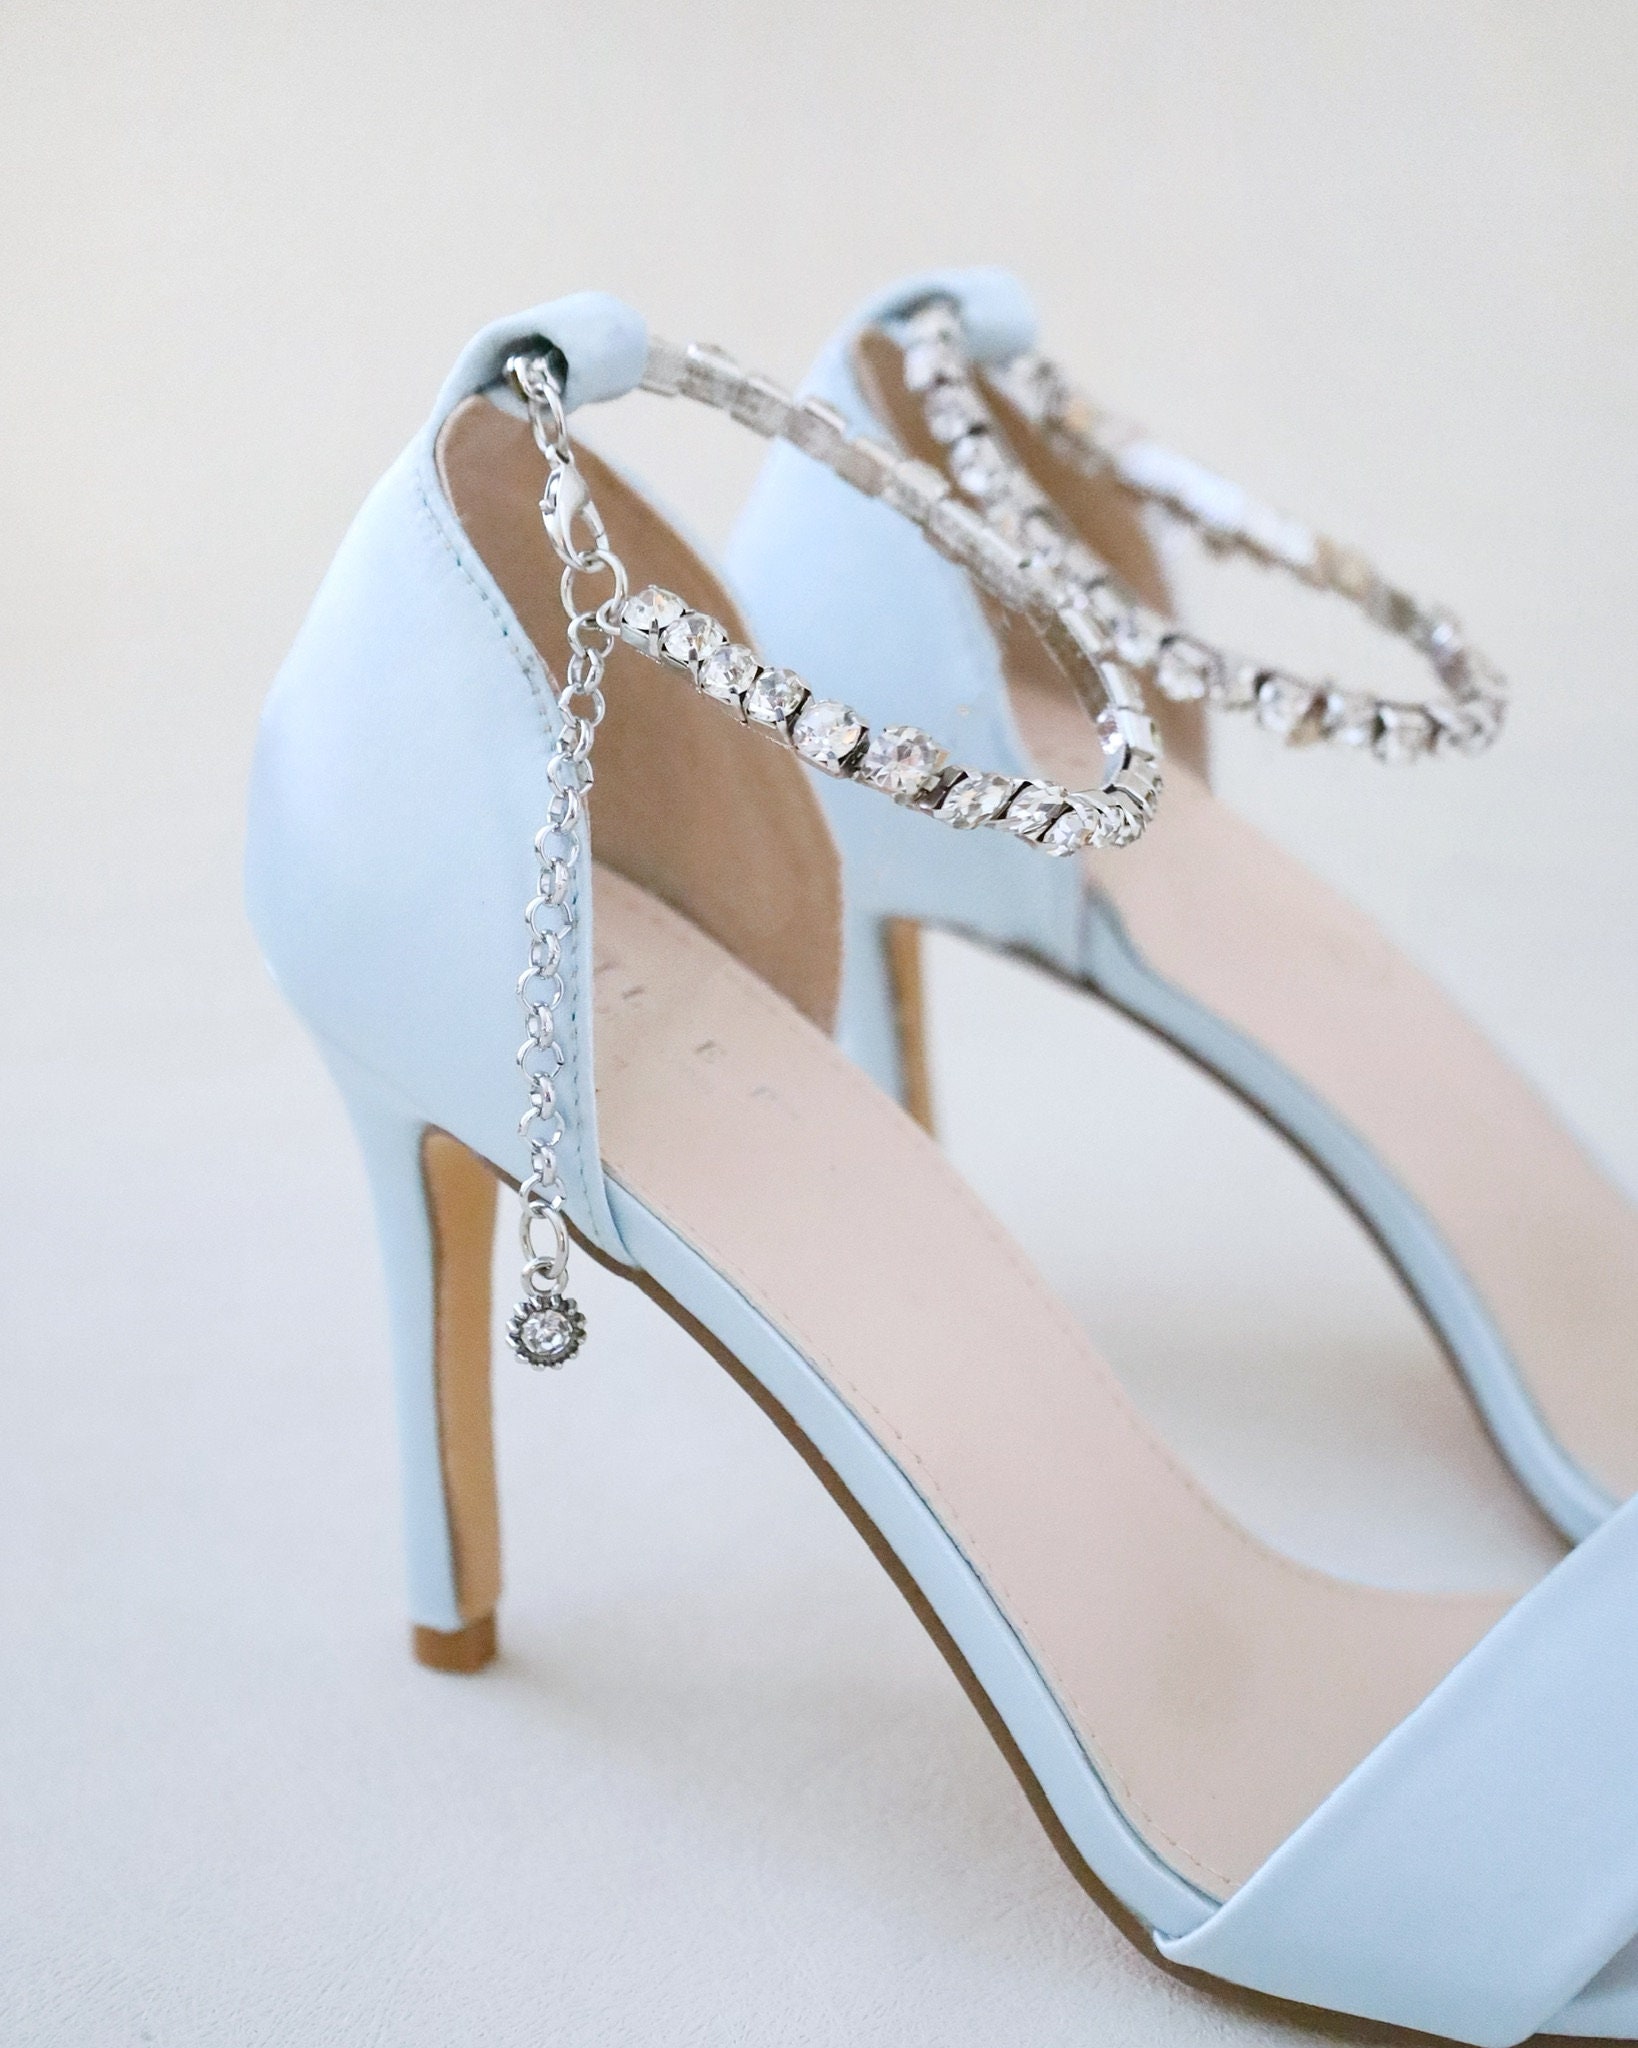 Light Blue Satin Pointy Toe Pump Low Heel with Teardrop Rhinestones -  Bridesmaids Shoes, Bridal Shoes, Wedding Shoes